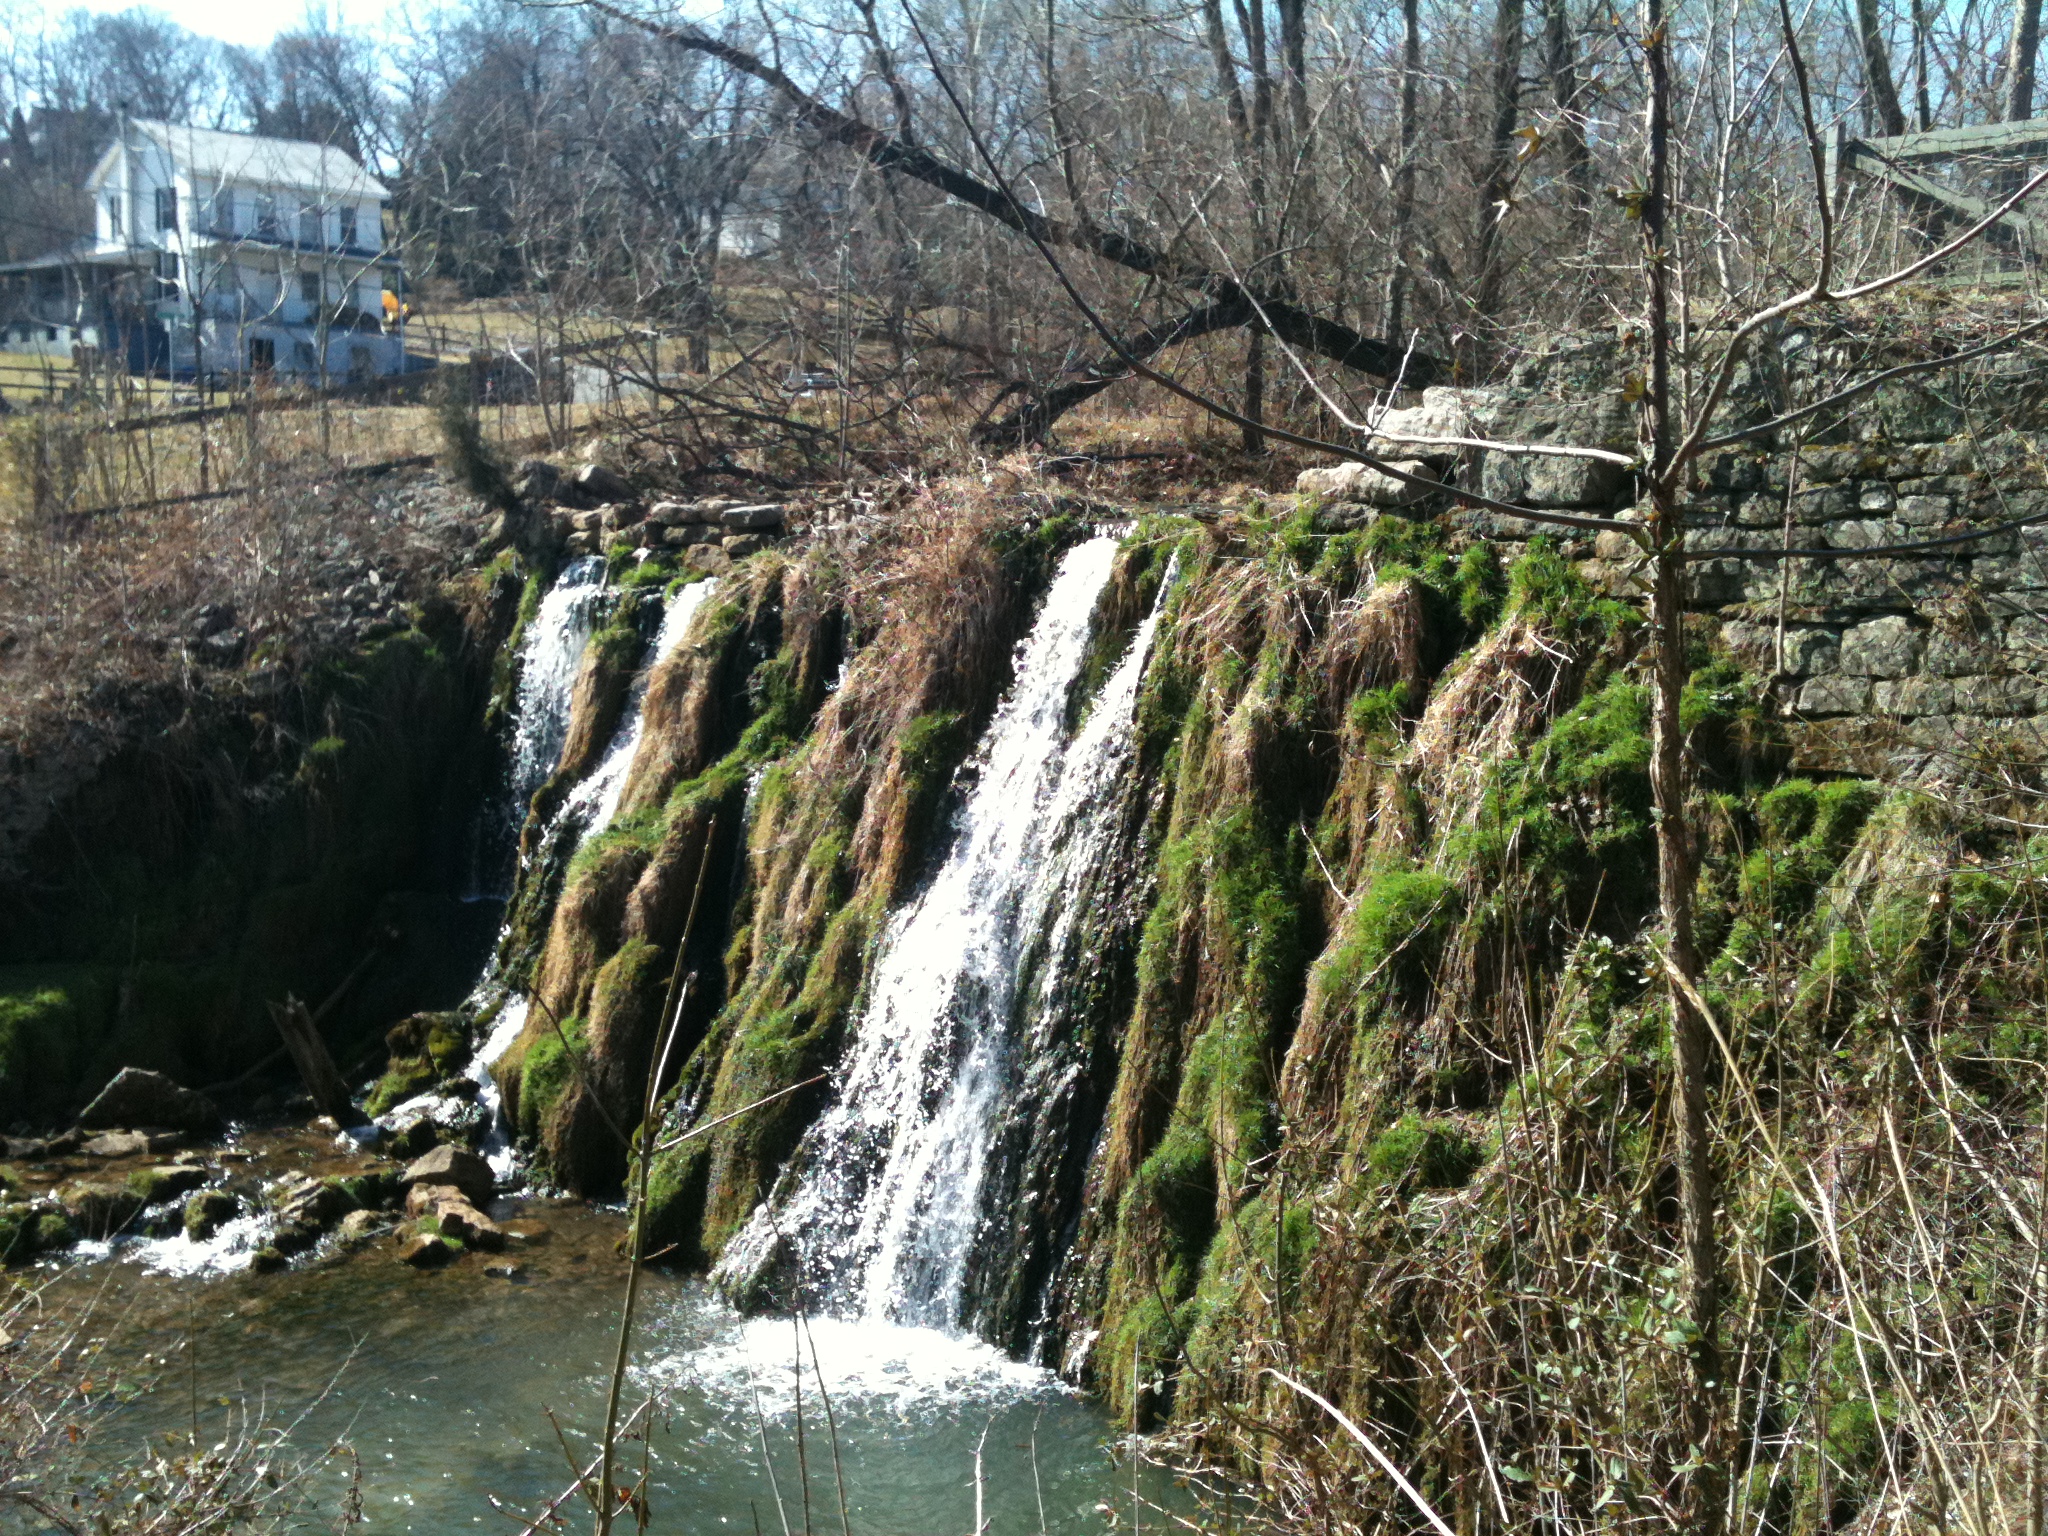 The Waterfalls at Falling Waters